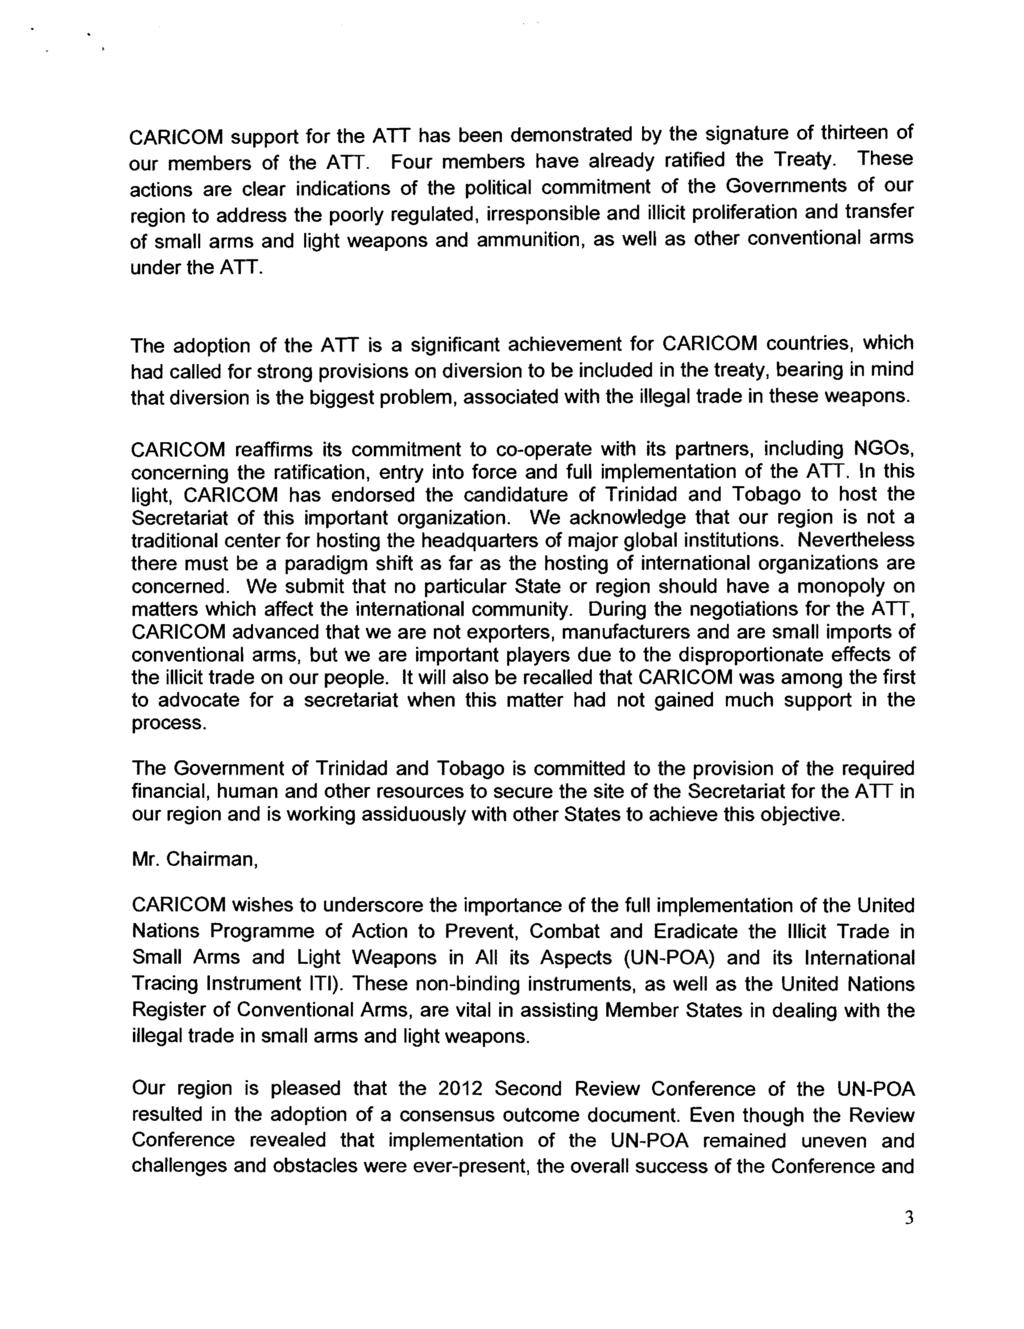 CARICOM support for the A TT has been demonstrated by the signature of thirteen of our members of the ATT. Four members have already ratified the Treaty.